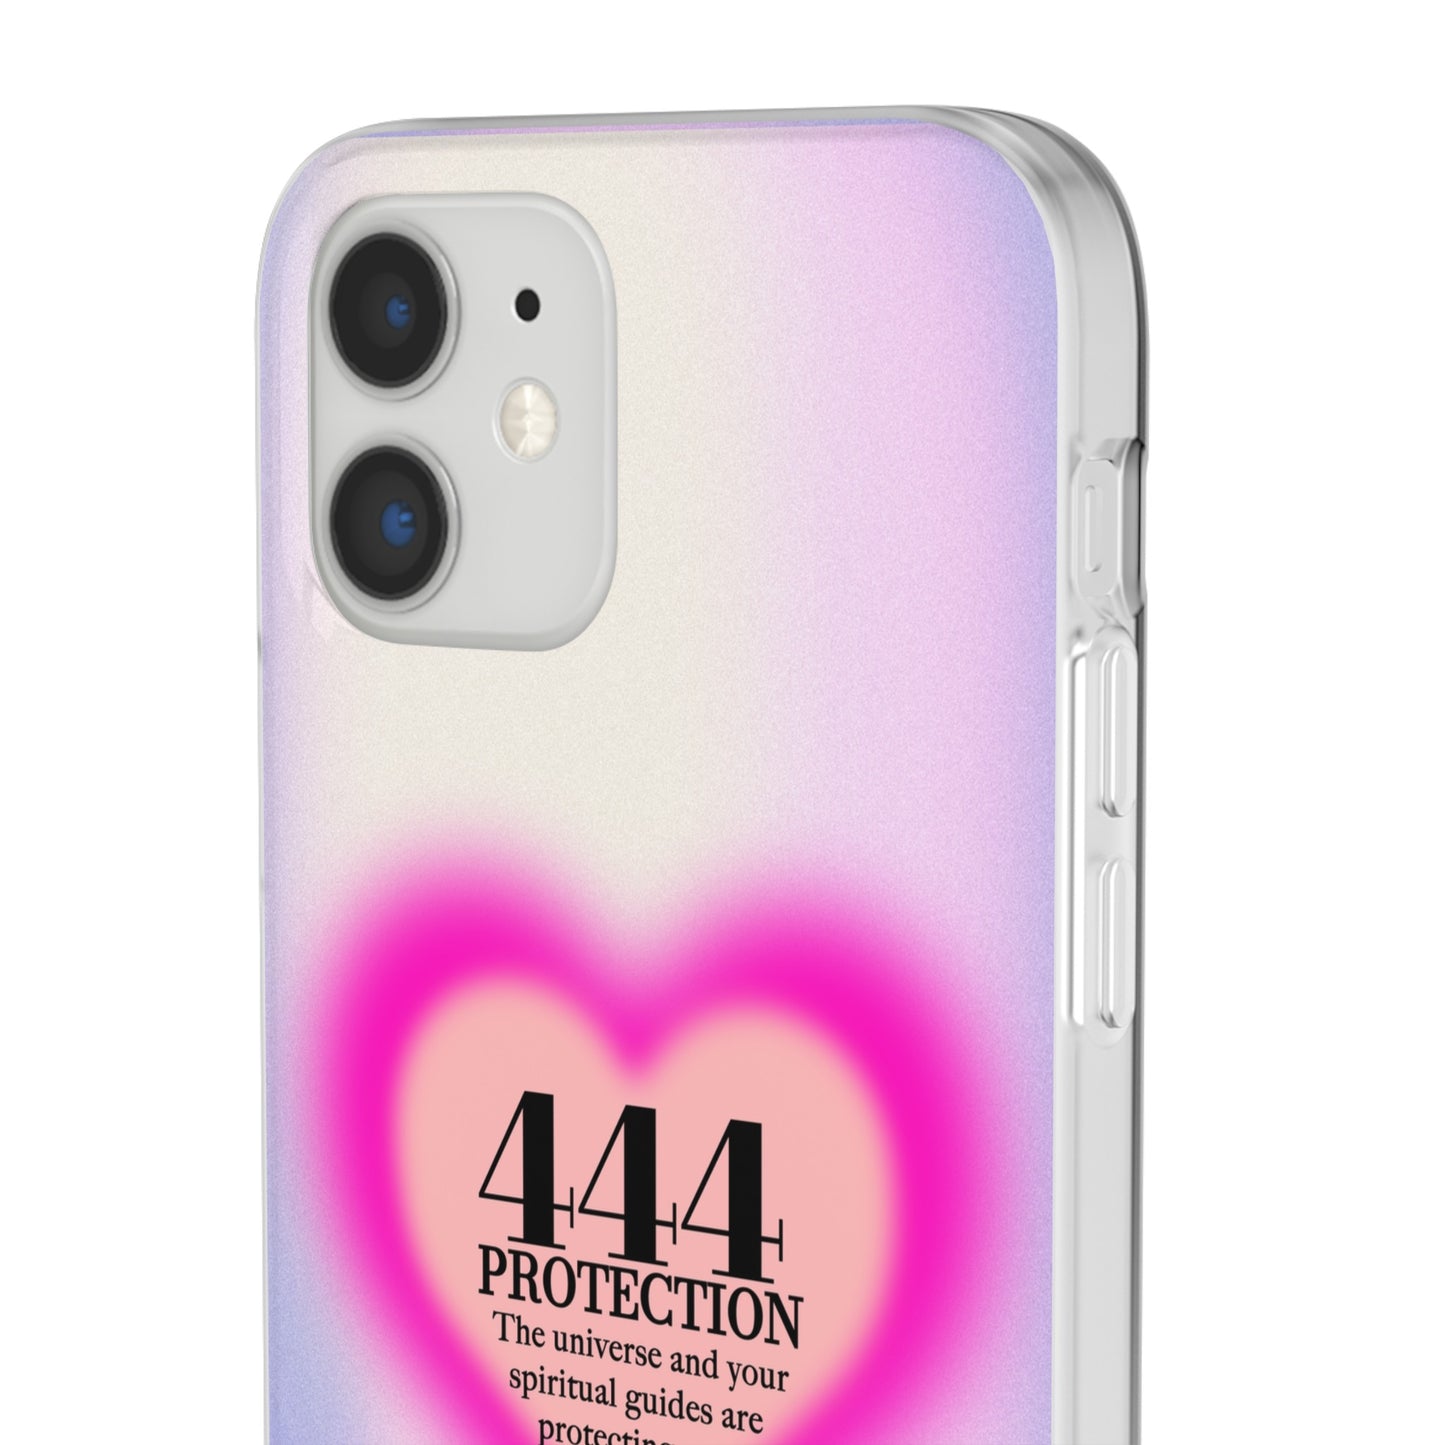 Angel Number 444 iPhone Case